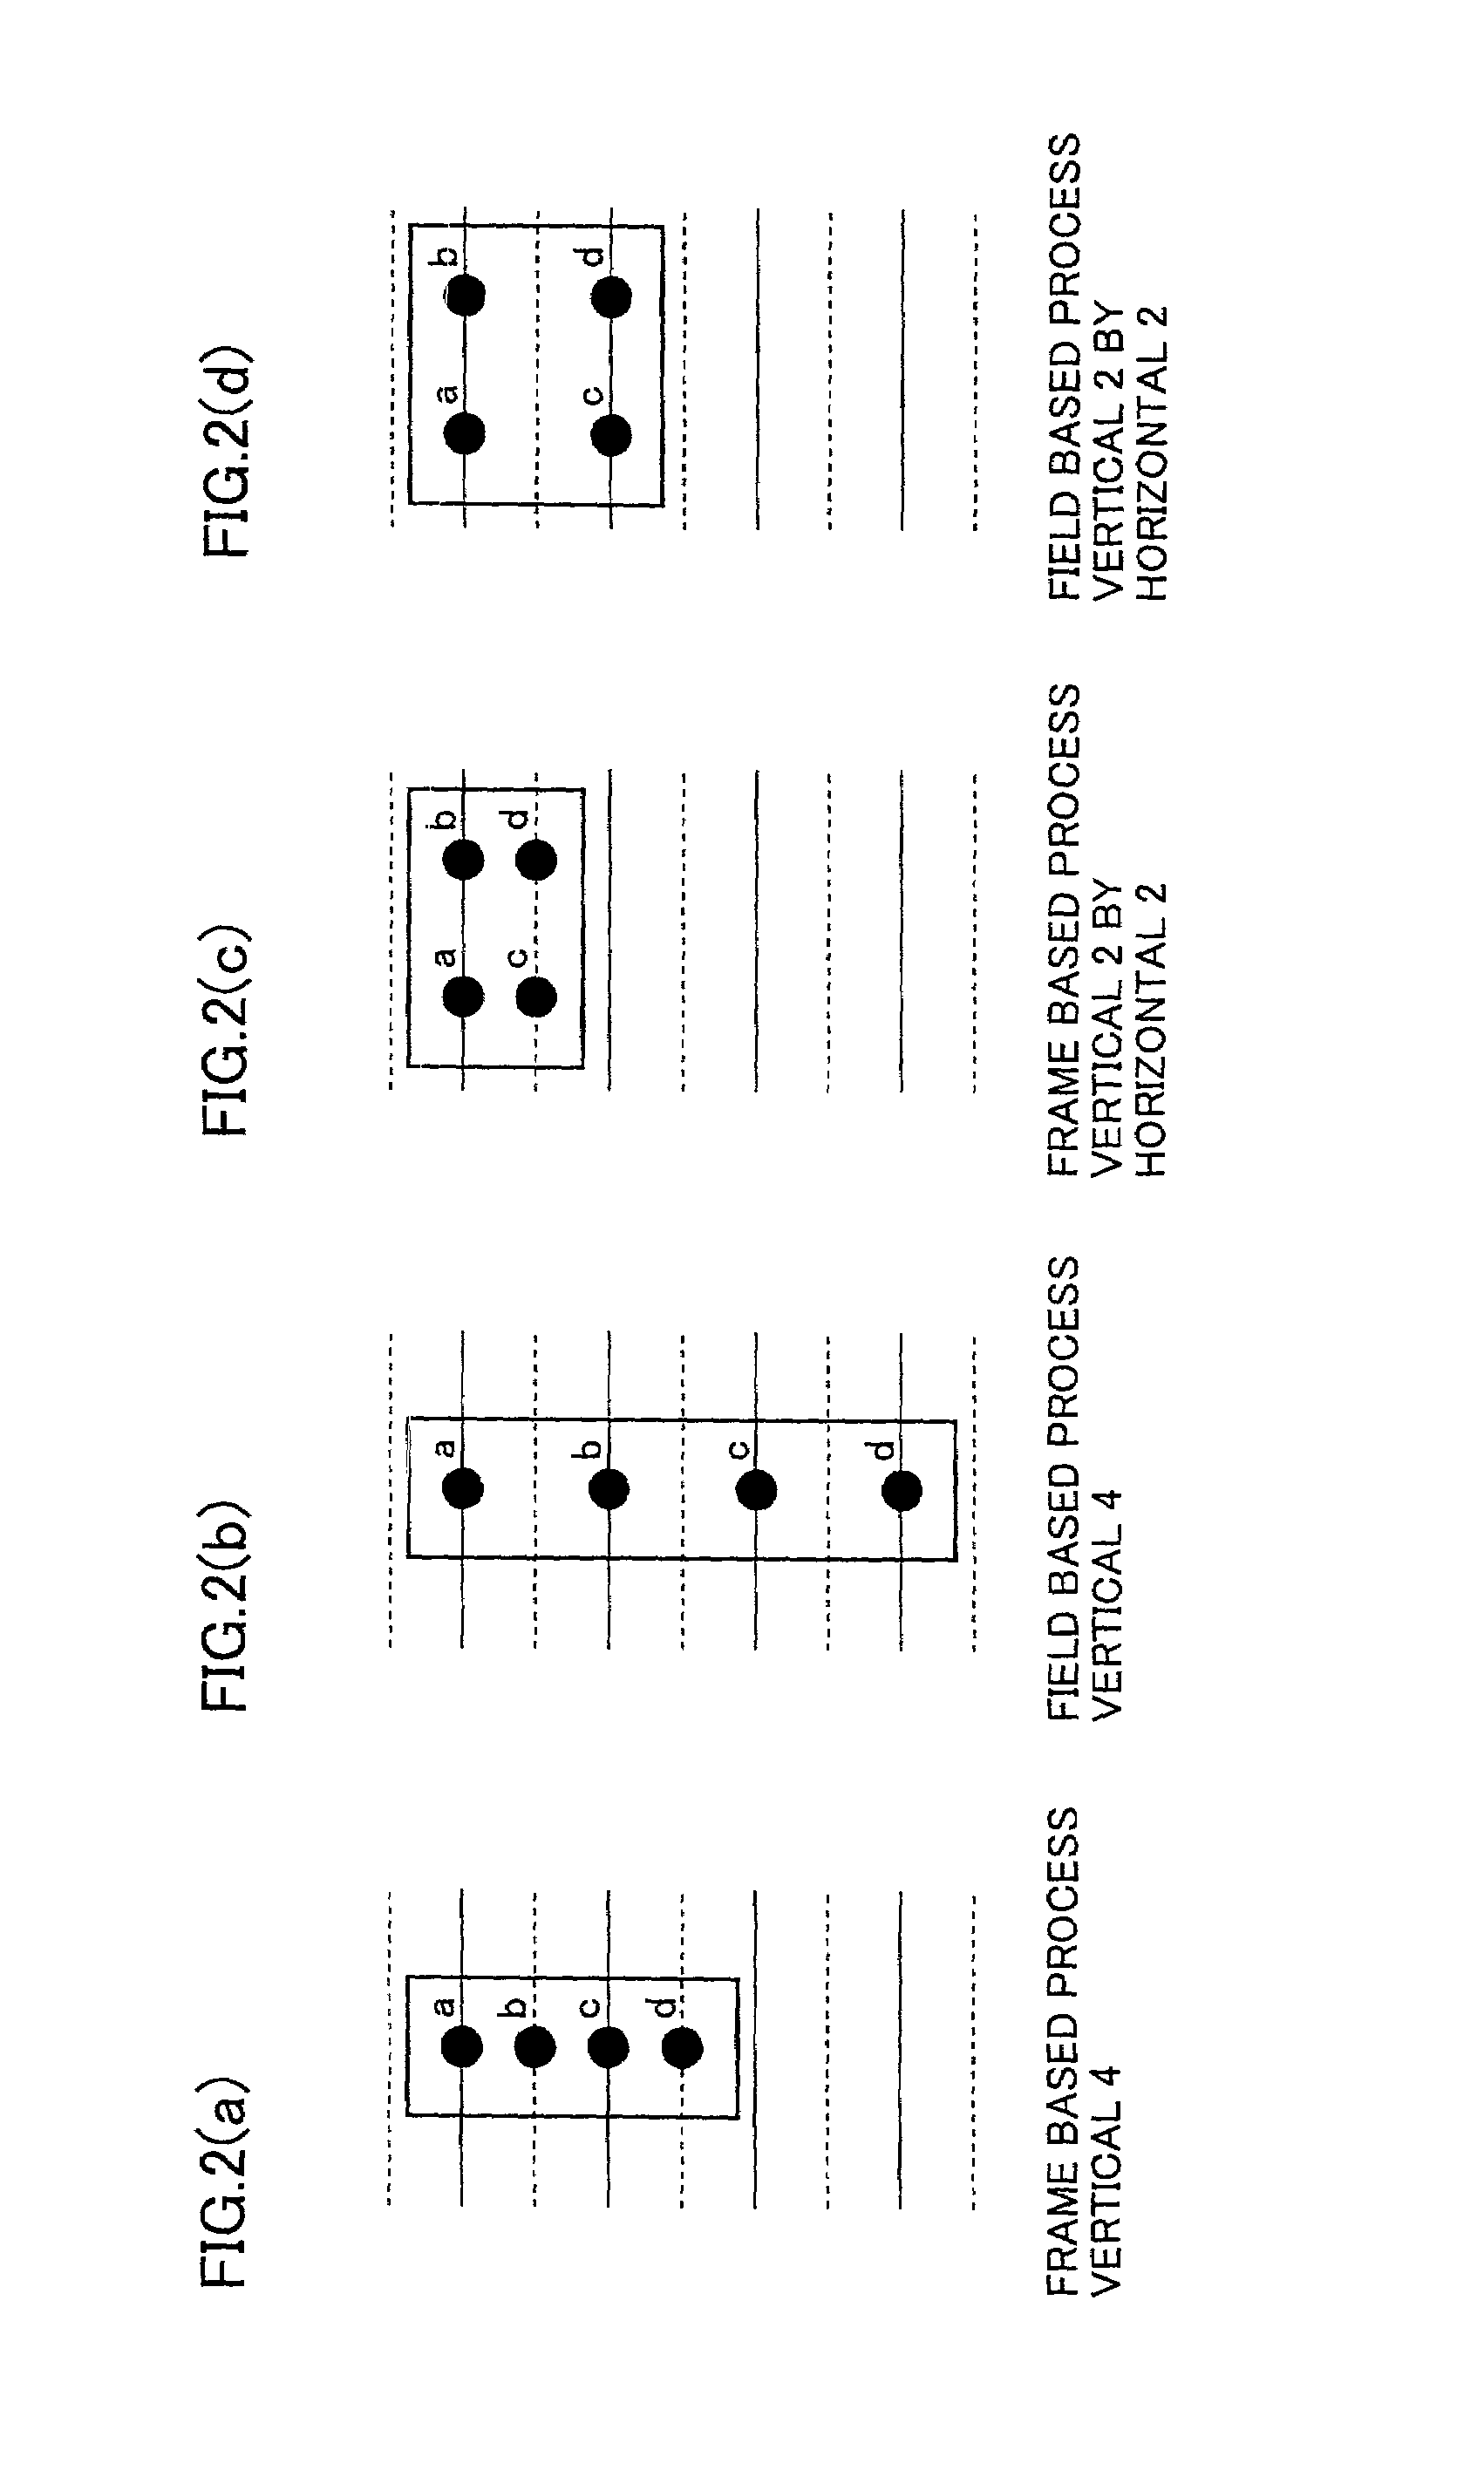 Motion image decoding apparatus and method reducing error accumulation and hence image degradation